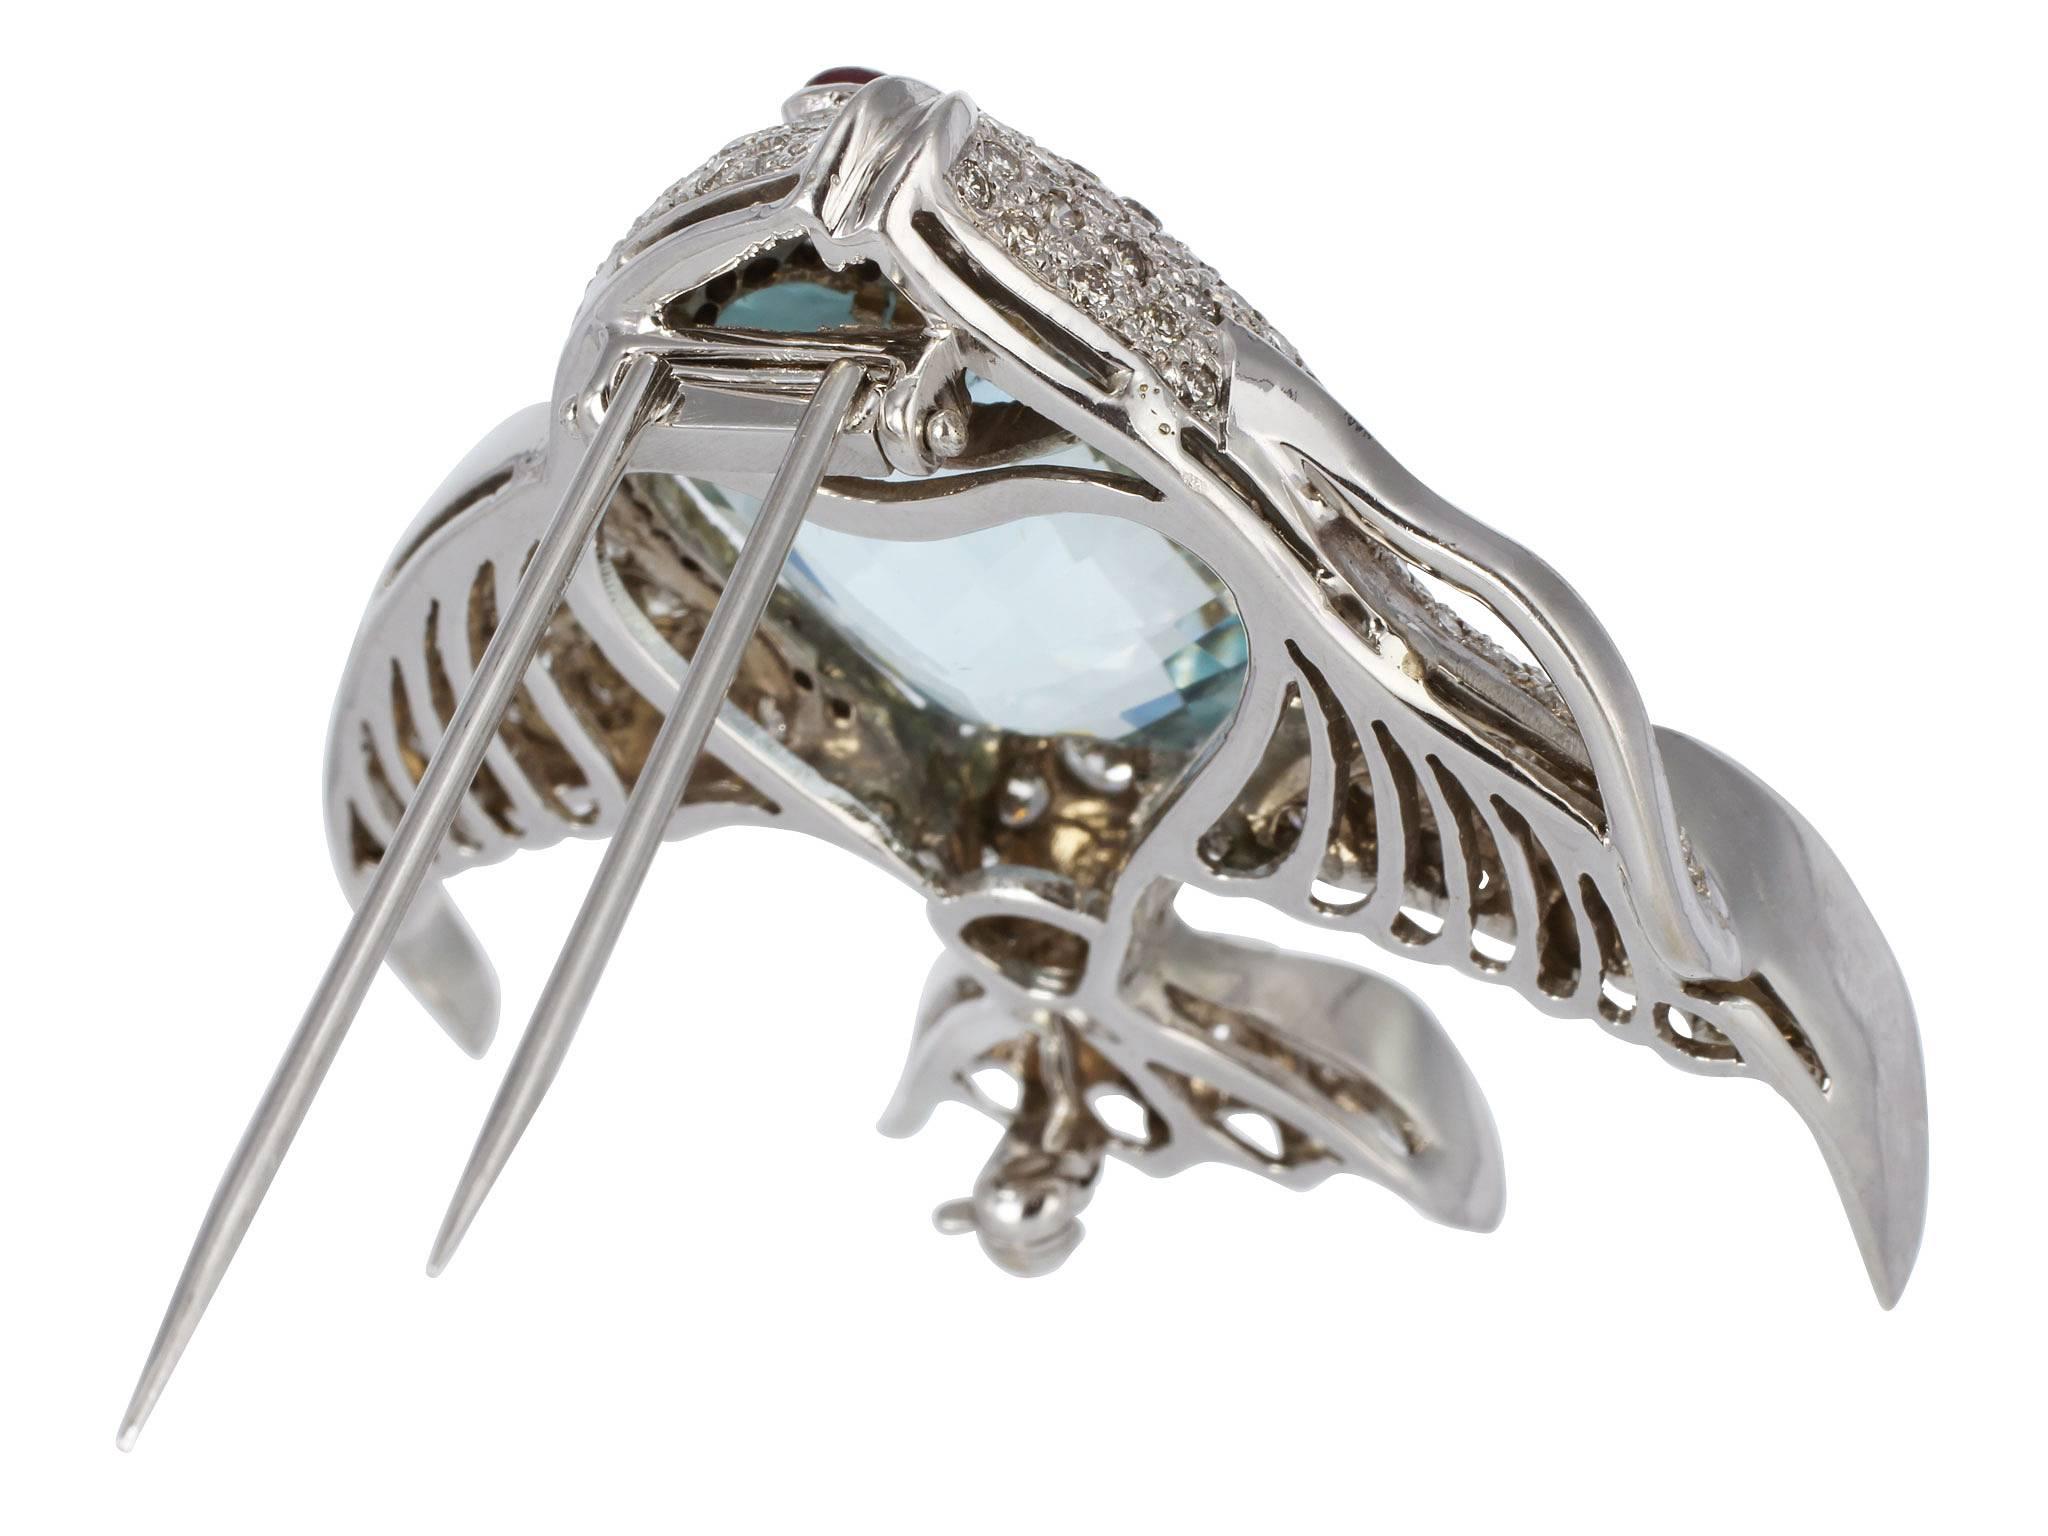 24 Carat Aquamarine Diamond Gold Angelfish Pin In Excellent Condition For Sale In Chestnut Hill, MA